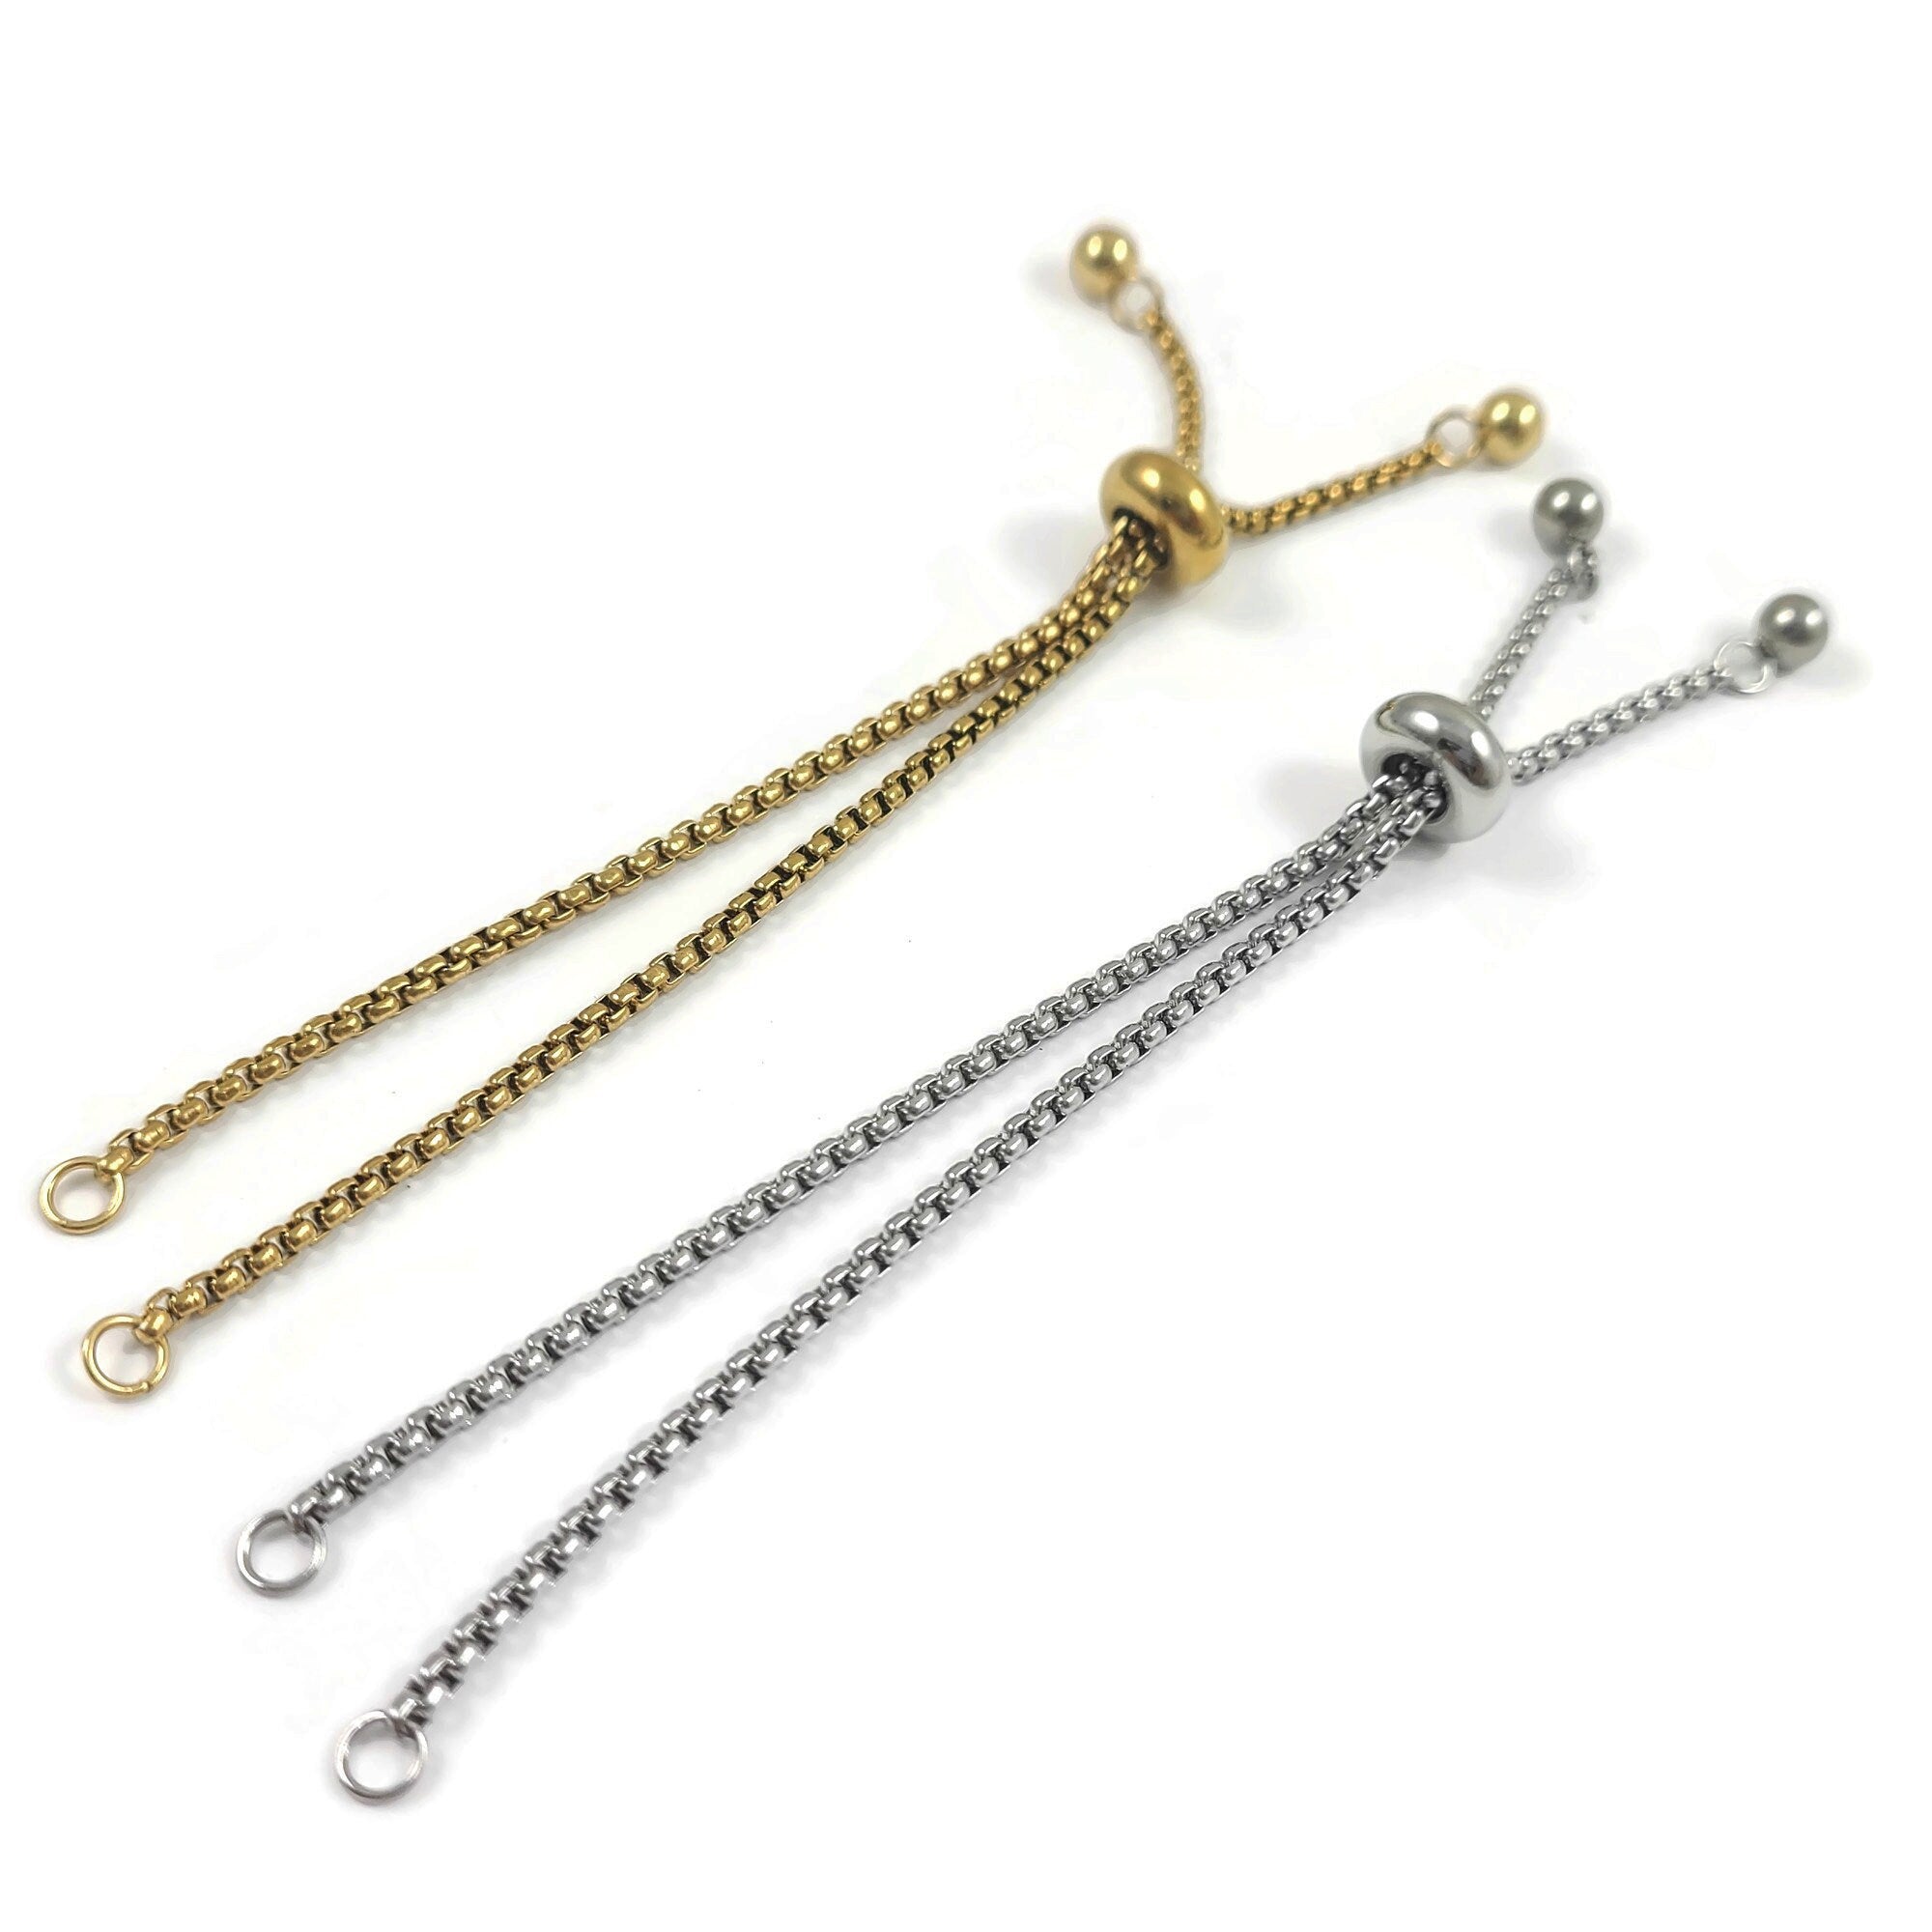  10pcs/Lot 50mm Stainless Steel Necklace Extension Chain Bulk  Bracelet Extended Chains Tail Chains Extender for Jewelry Making : Arts,  Crafts & Sewing